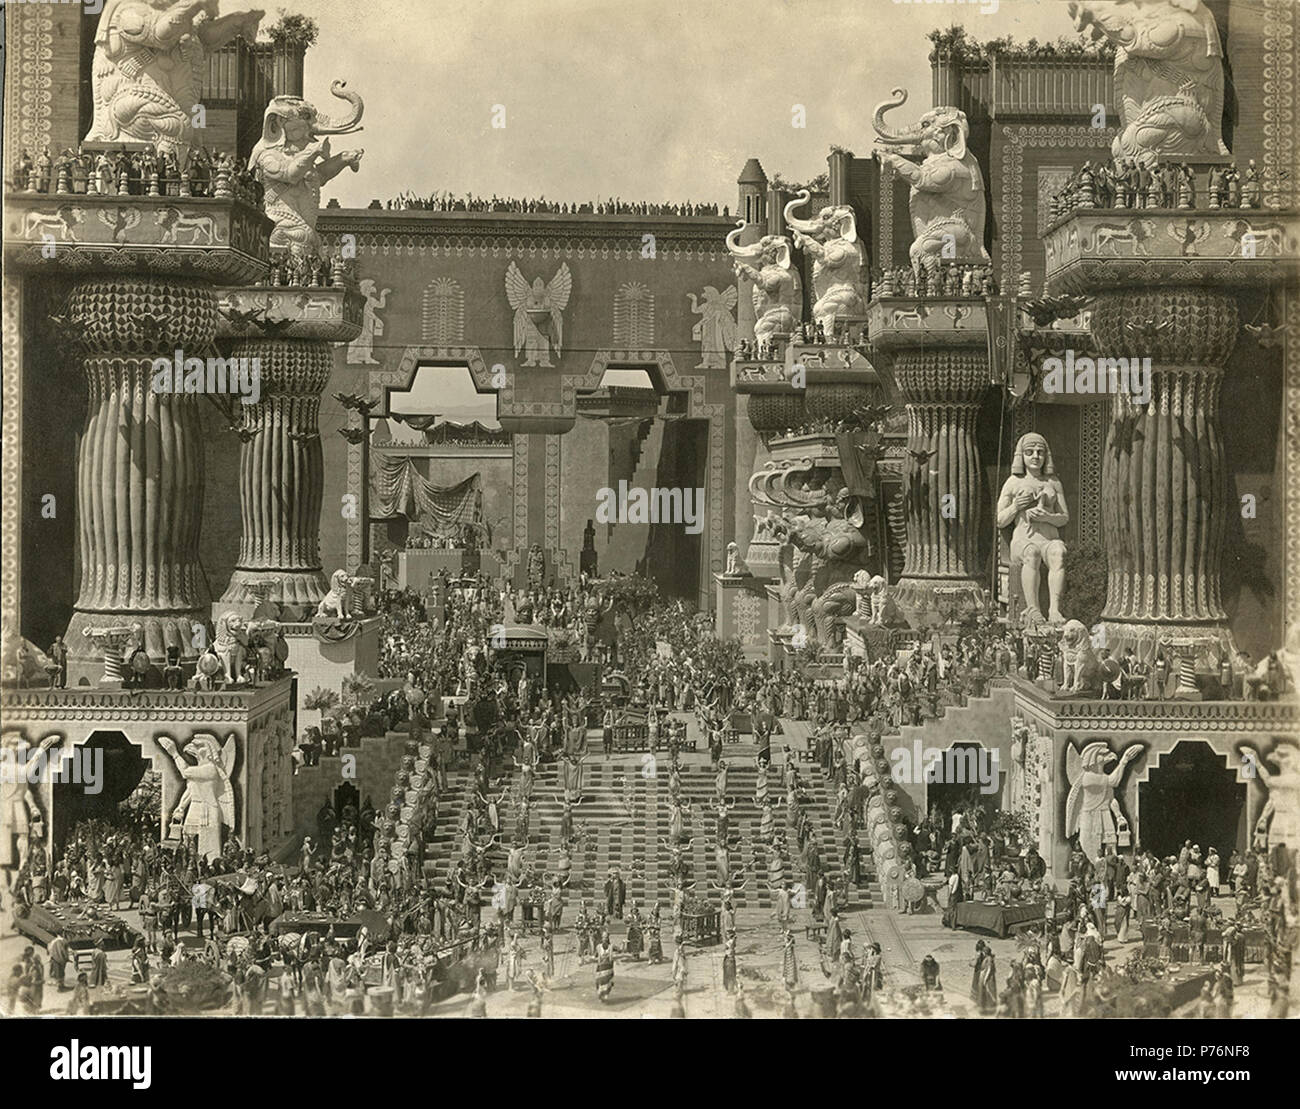 English: Scene still of Belshazzar's feast in the central courtyard of Babylon from D. W. Griffith's 1916 silent film Intolerance. 5 May 2004 (original upload date) 5 Griffith-intolerance Stock Photo